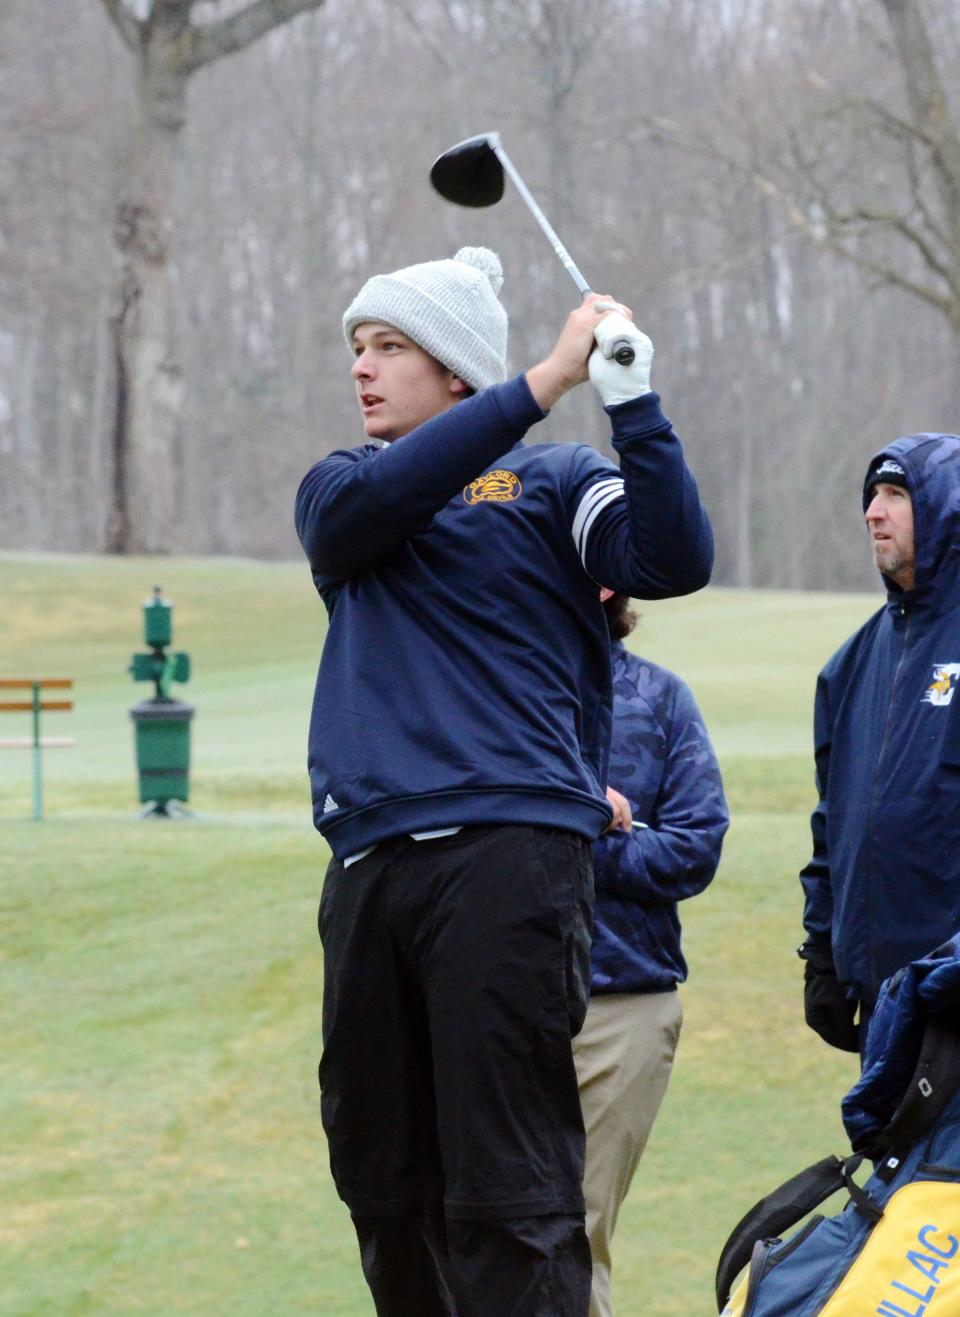 Gaylord's Kole Putnam keeps an eye on his tee shot on hole No. 3 of the Petoskey-Bay View Country Club Monday.